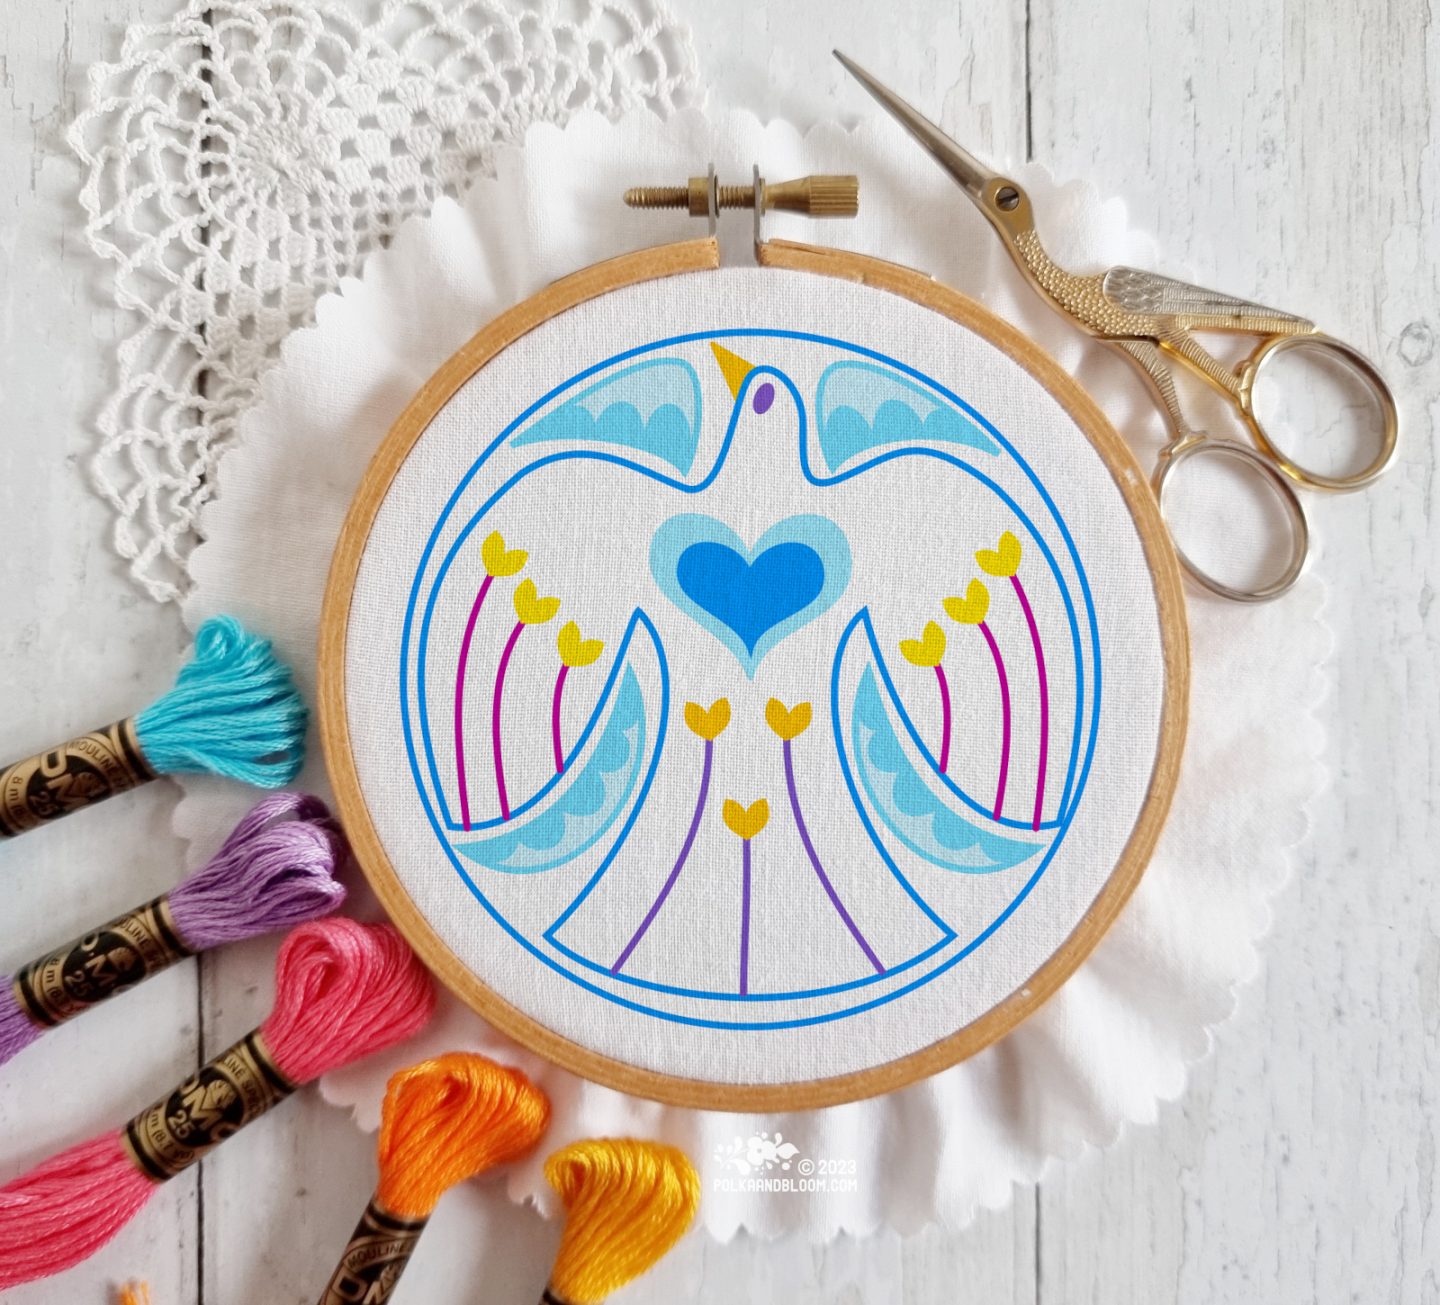 An illustration of a blue bird in a blue circle is inserted on a photo of an embroidery hoop with white fabric, surrounded by skeins of embroidery thread.